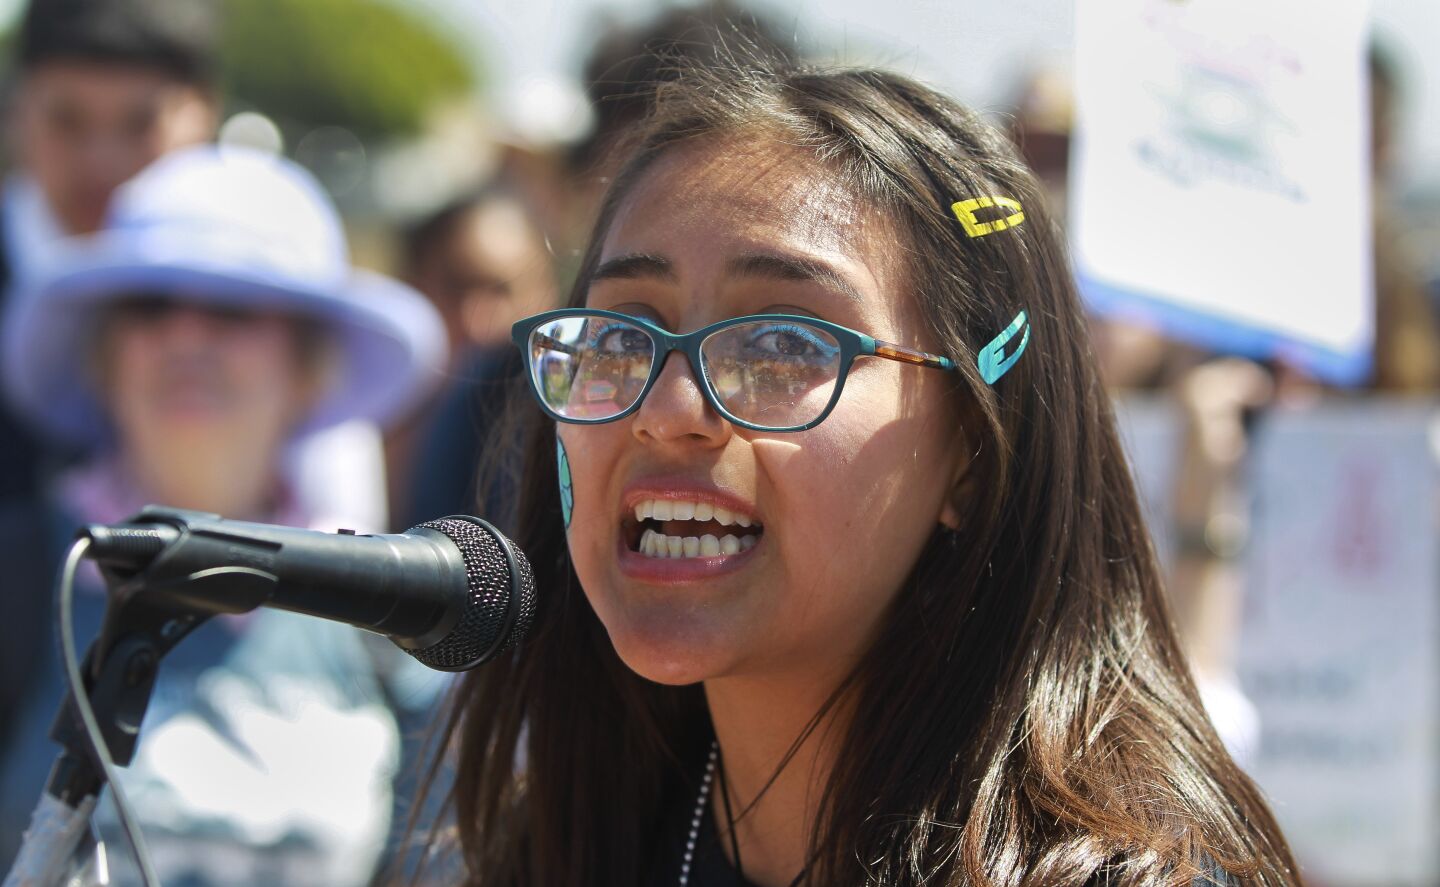 Senior Vanessa Cascante, 17, who is the president of the Mission Bay High School Eco Club, speaks during a rally at the Kendall-Frost Marsh Preserve to demand action on the climate crisis after the students walked out if classes to participate in the Global Climate Strike in Pacific Beach on Friday, September 20, 2019 in San Diego, California.